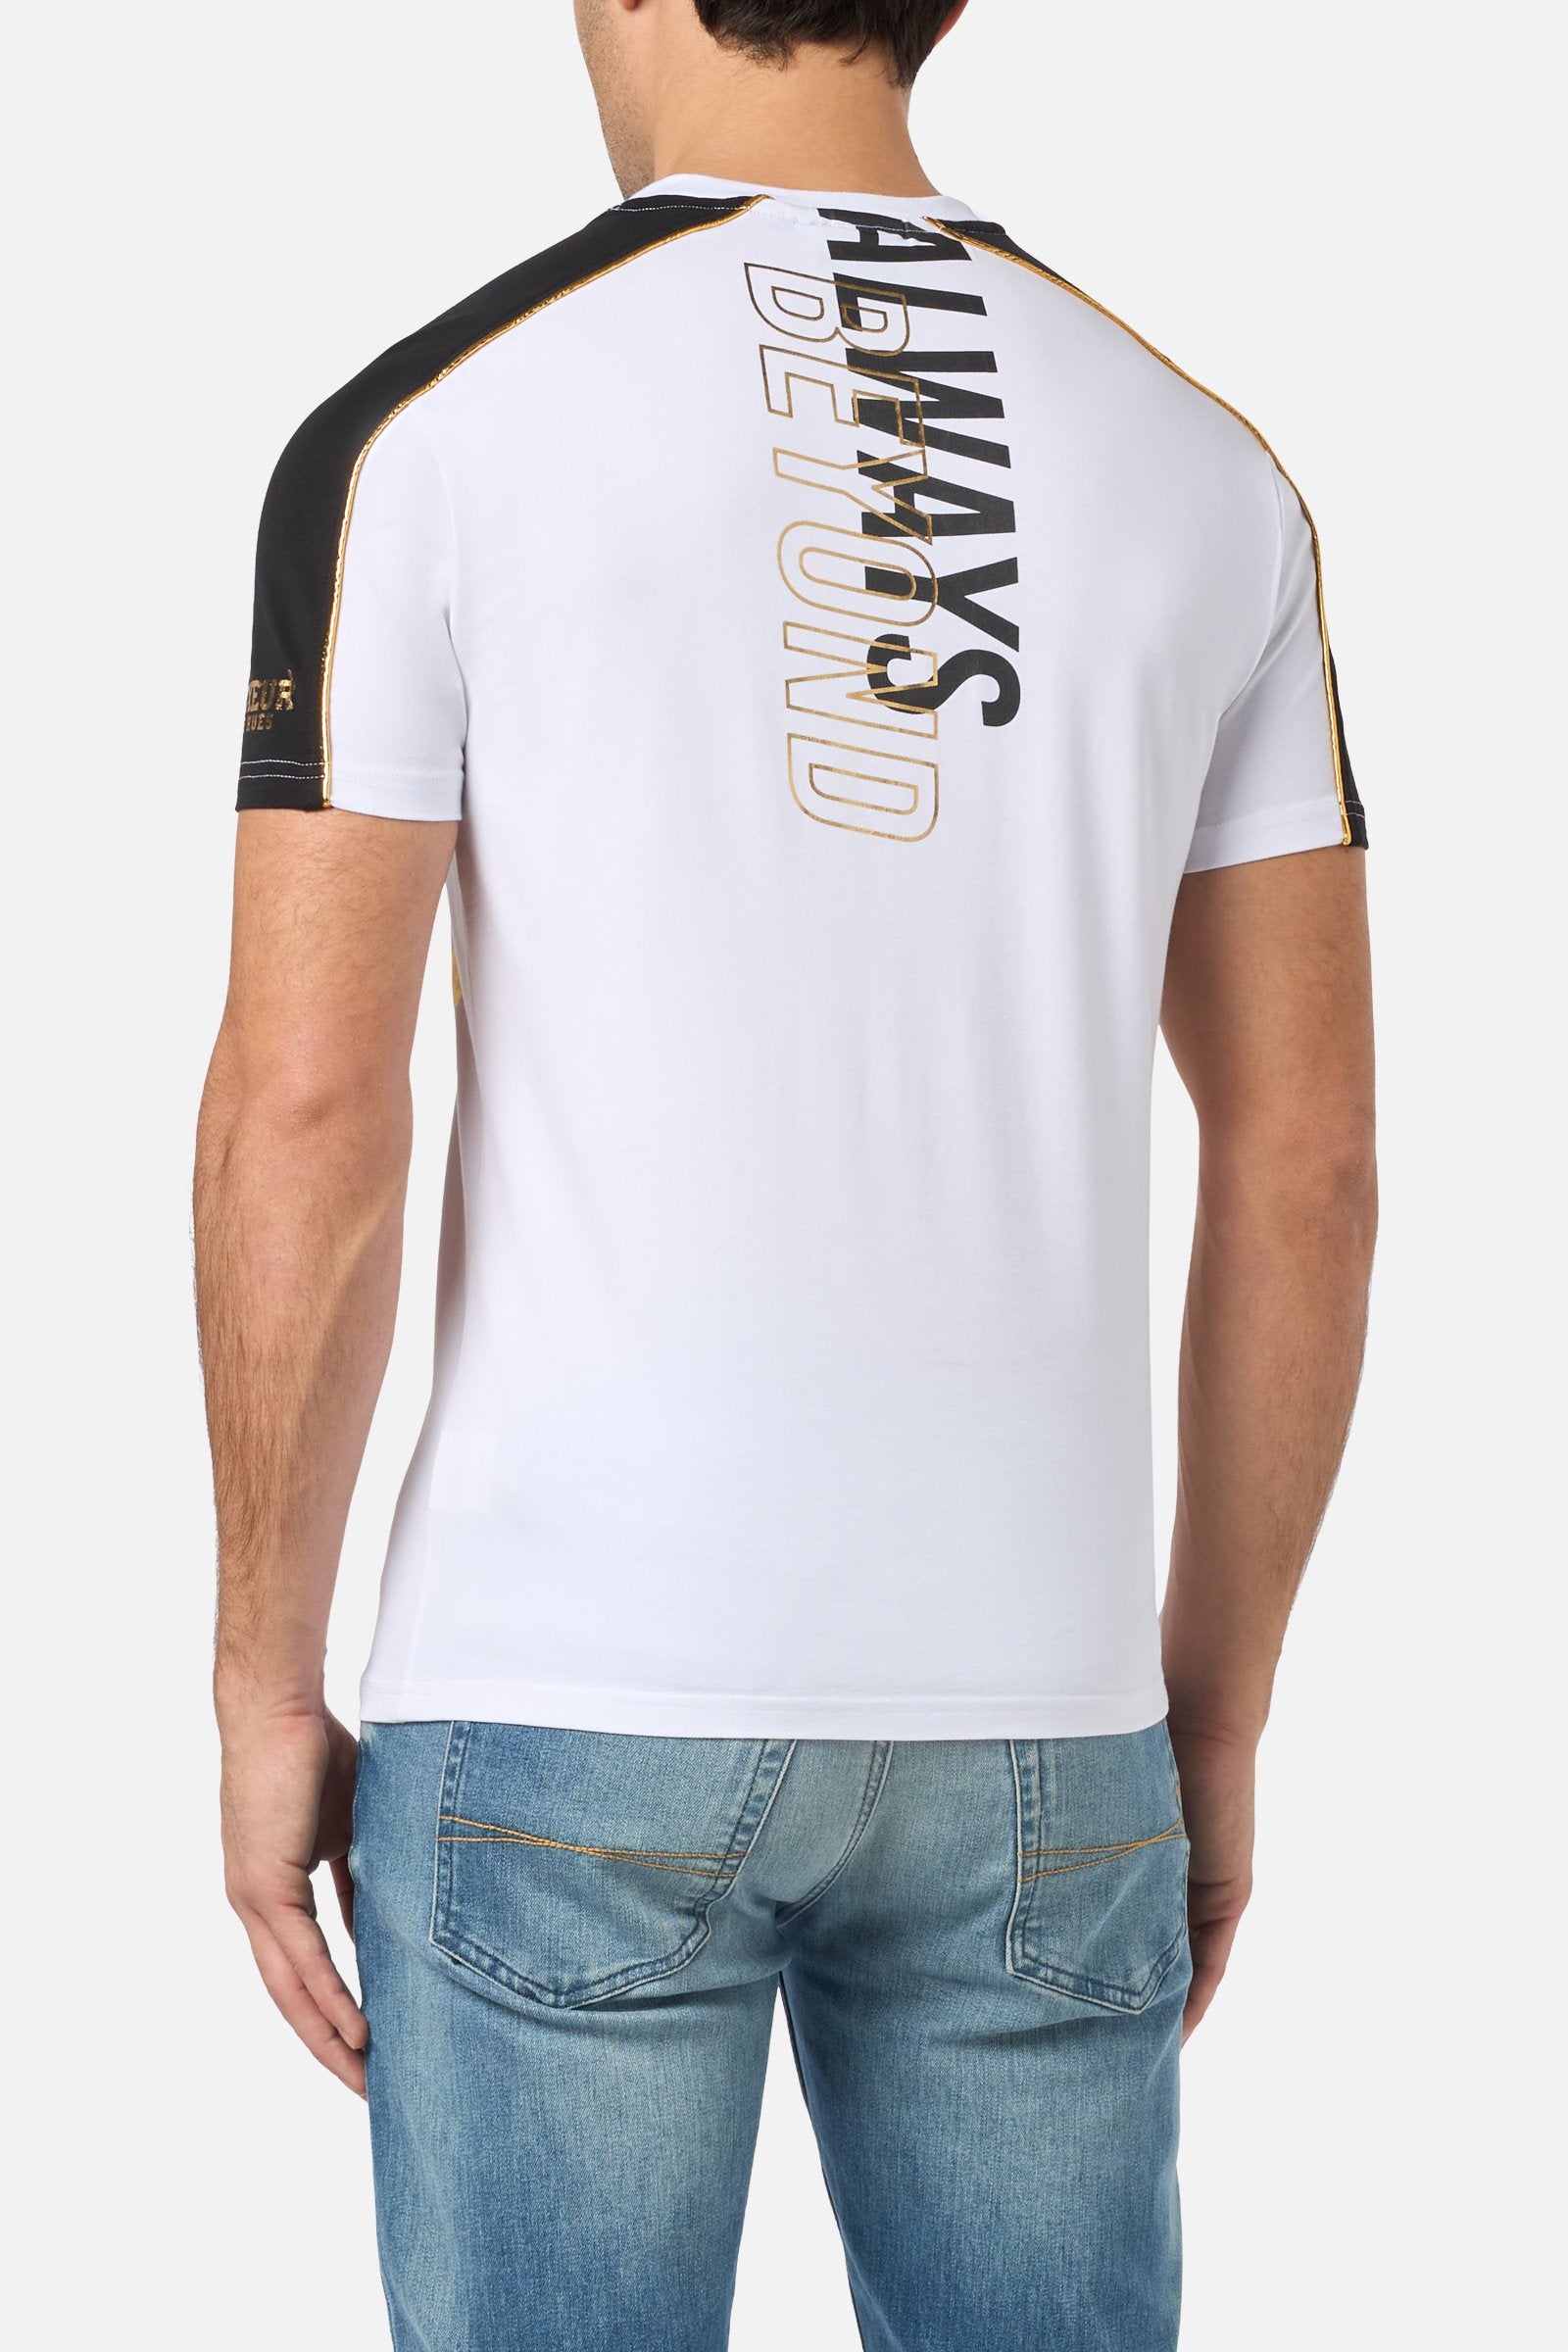 Regular T-Shirt with Print in White T-Shirts Boxeur des Rues   